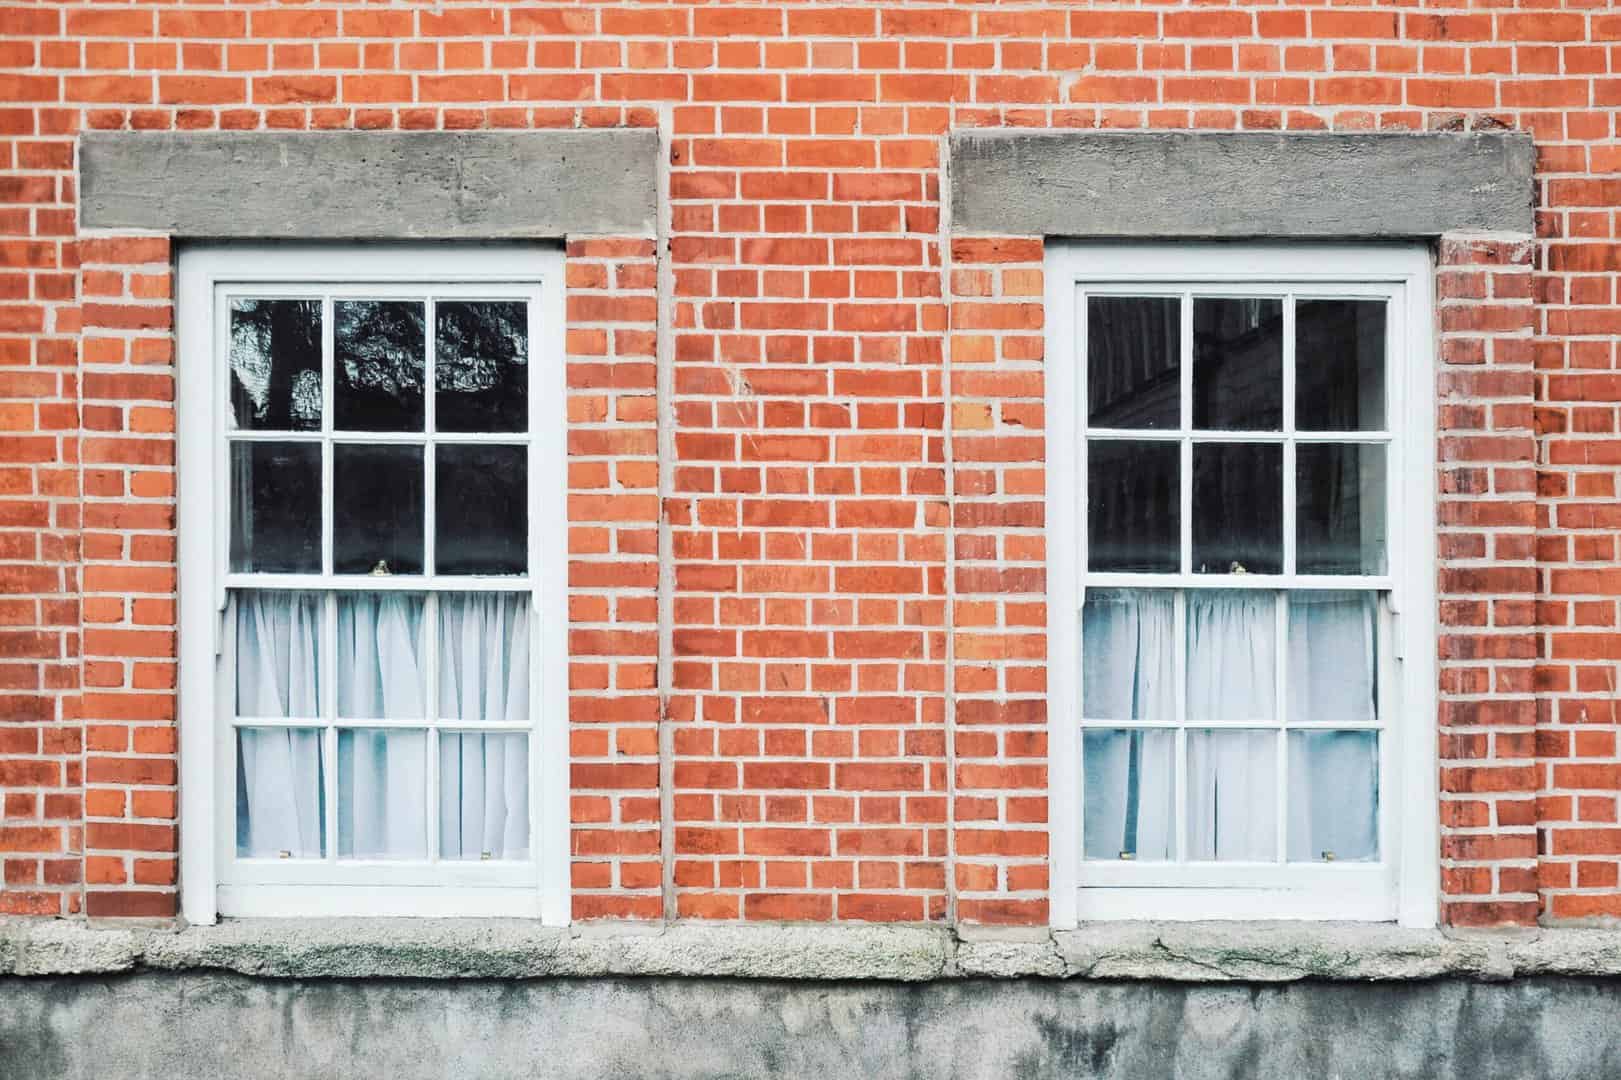 Two windows in a brick building.